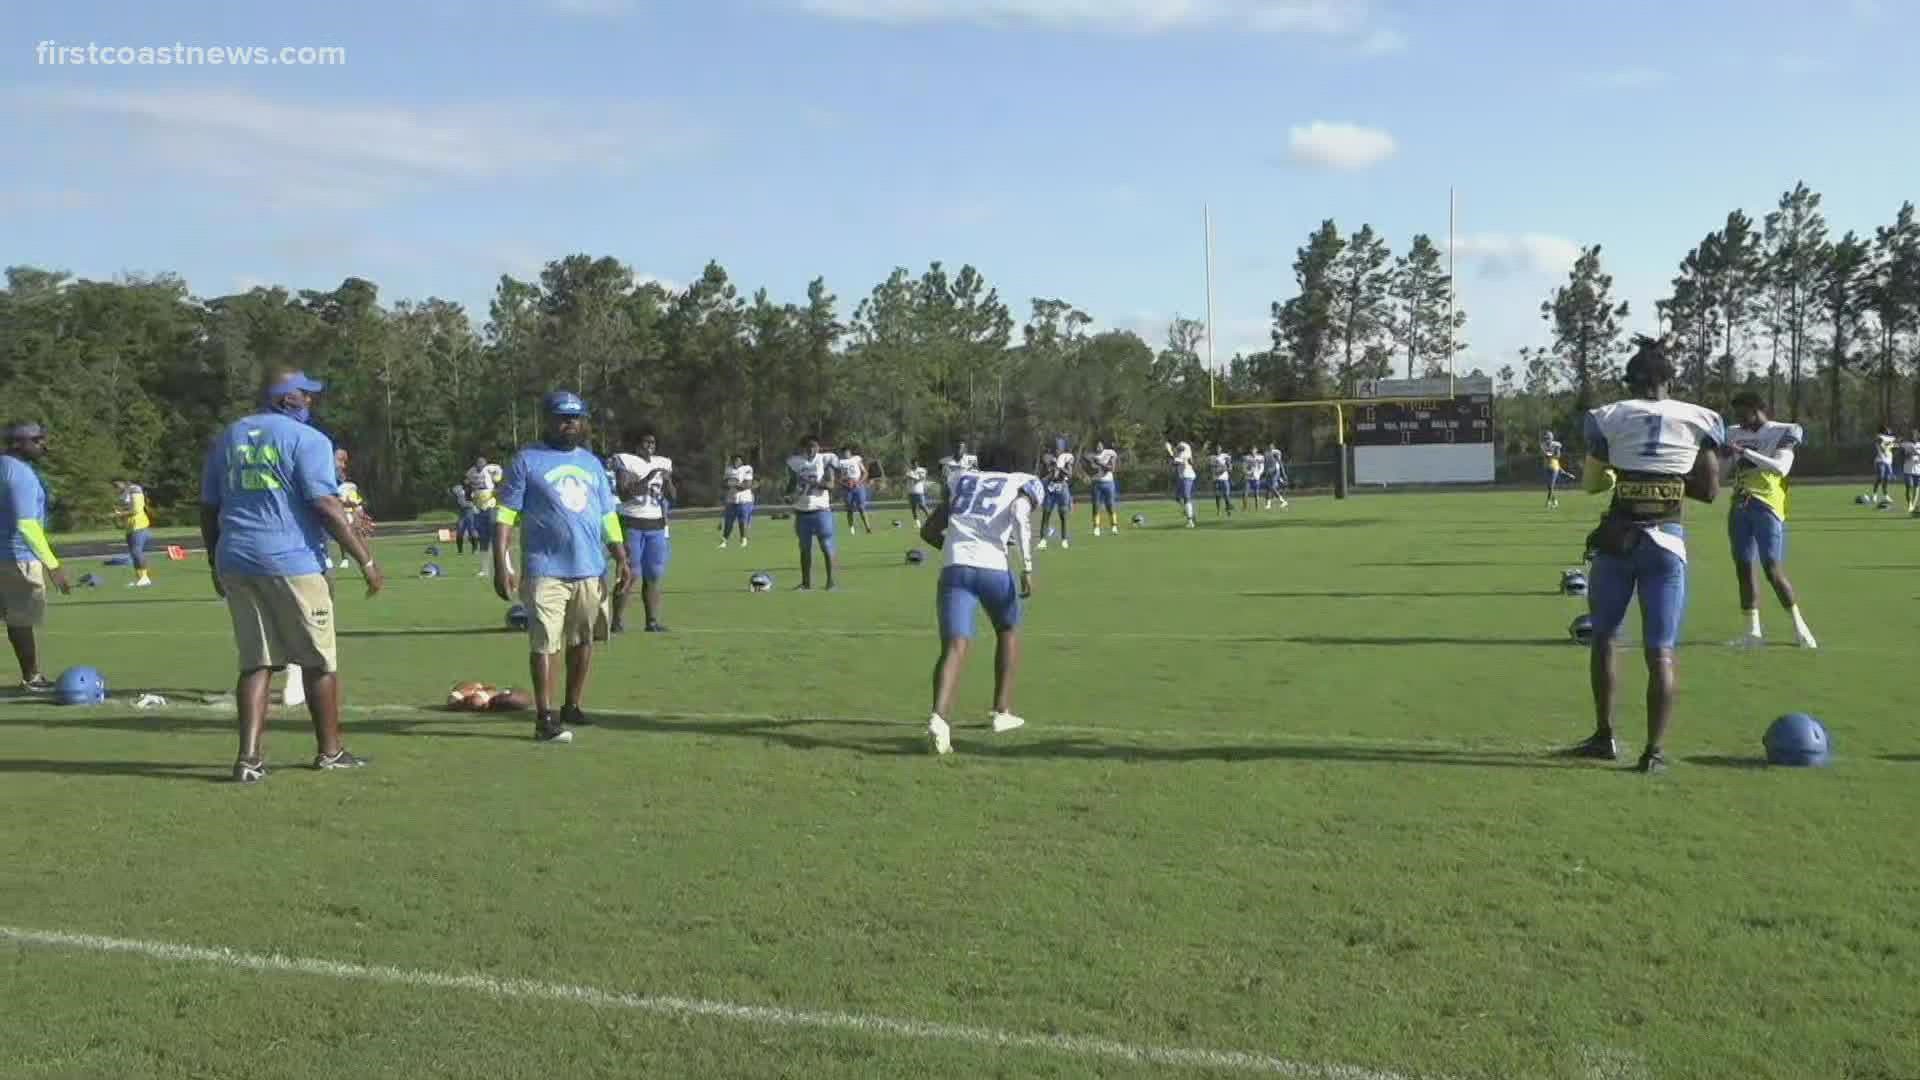 Live team coverage from our Game of the Week, Riverside at Atlantic Coast, begins at 5 p.m. on First Coast News